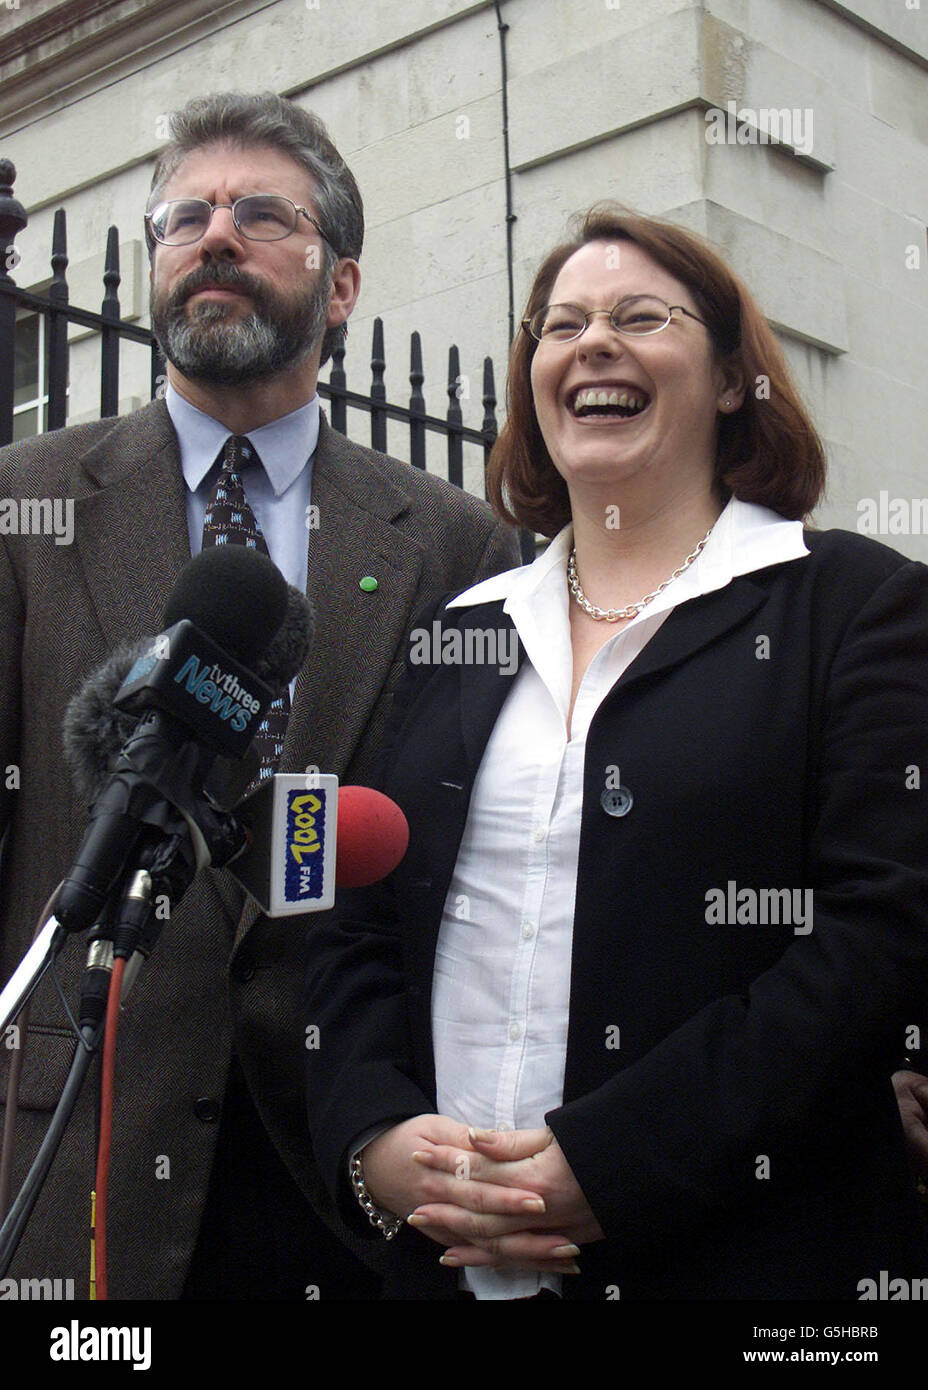 Sinn Fein's Michelle Gildernew MP for Fermanagh and South Tyrone, with the party's President Gerry Adams speaks to the media outside the High Court in Belfast, after winning her court case brought by the defeated Ulster Unionist's candidate James Cooper. *...The UUP and Cooper claimed that a polling station, in Garrison, Co Fermanagh, stayed open after hours enabling Sinn Fein members to vote. Gildernew won the Westminster Parliamentary seat by 53 votes. Stock Photo